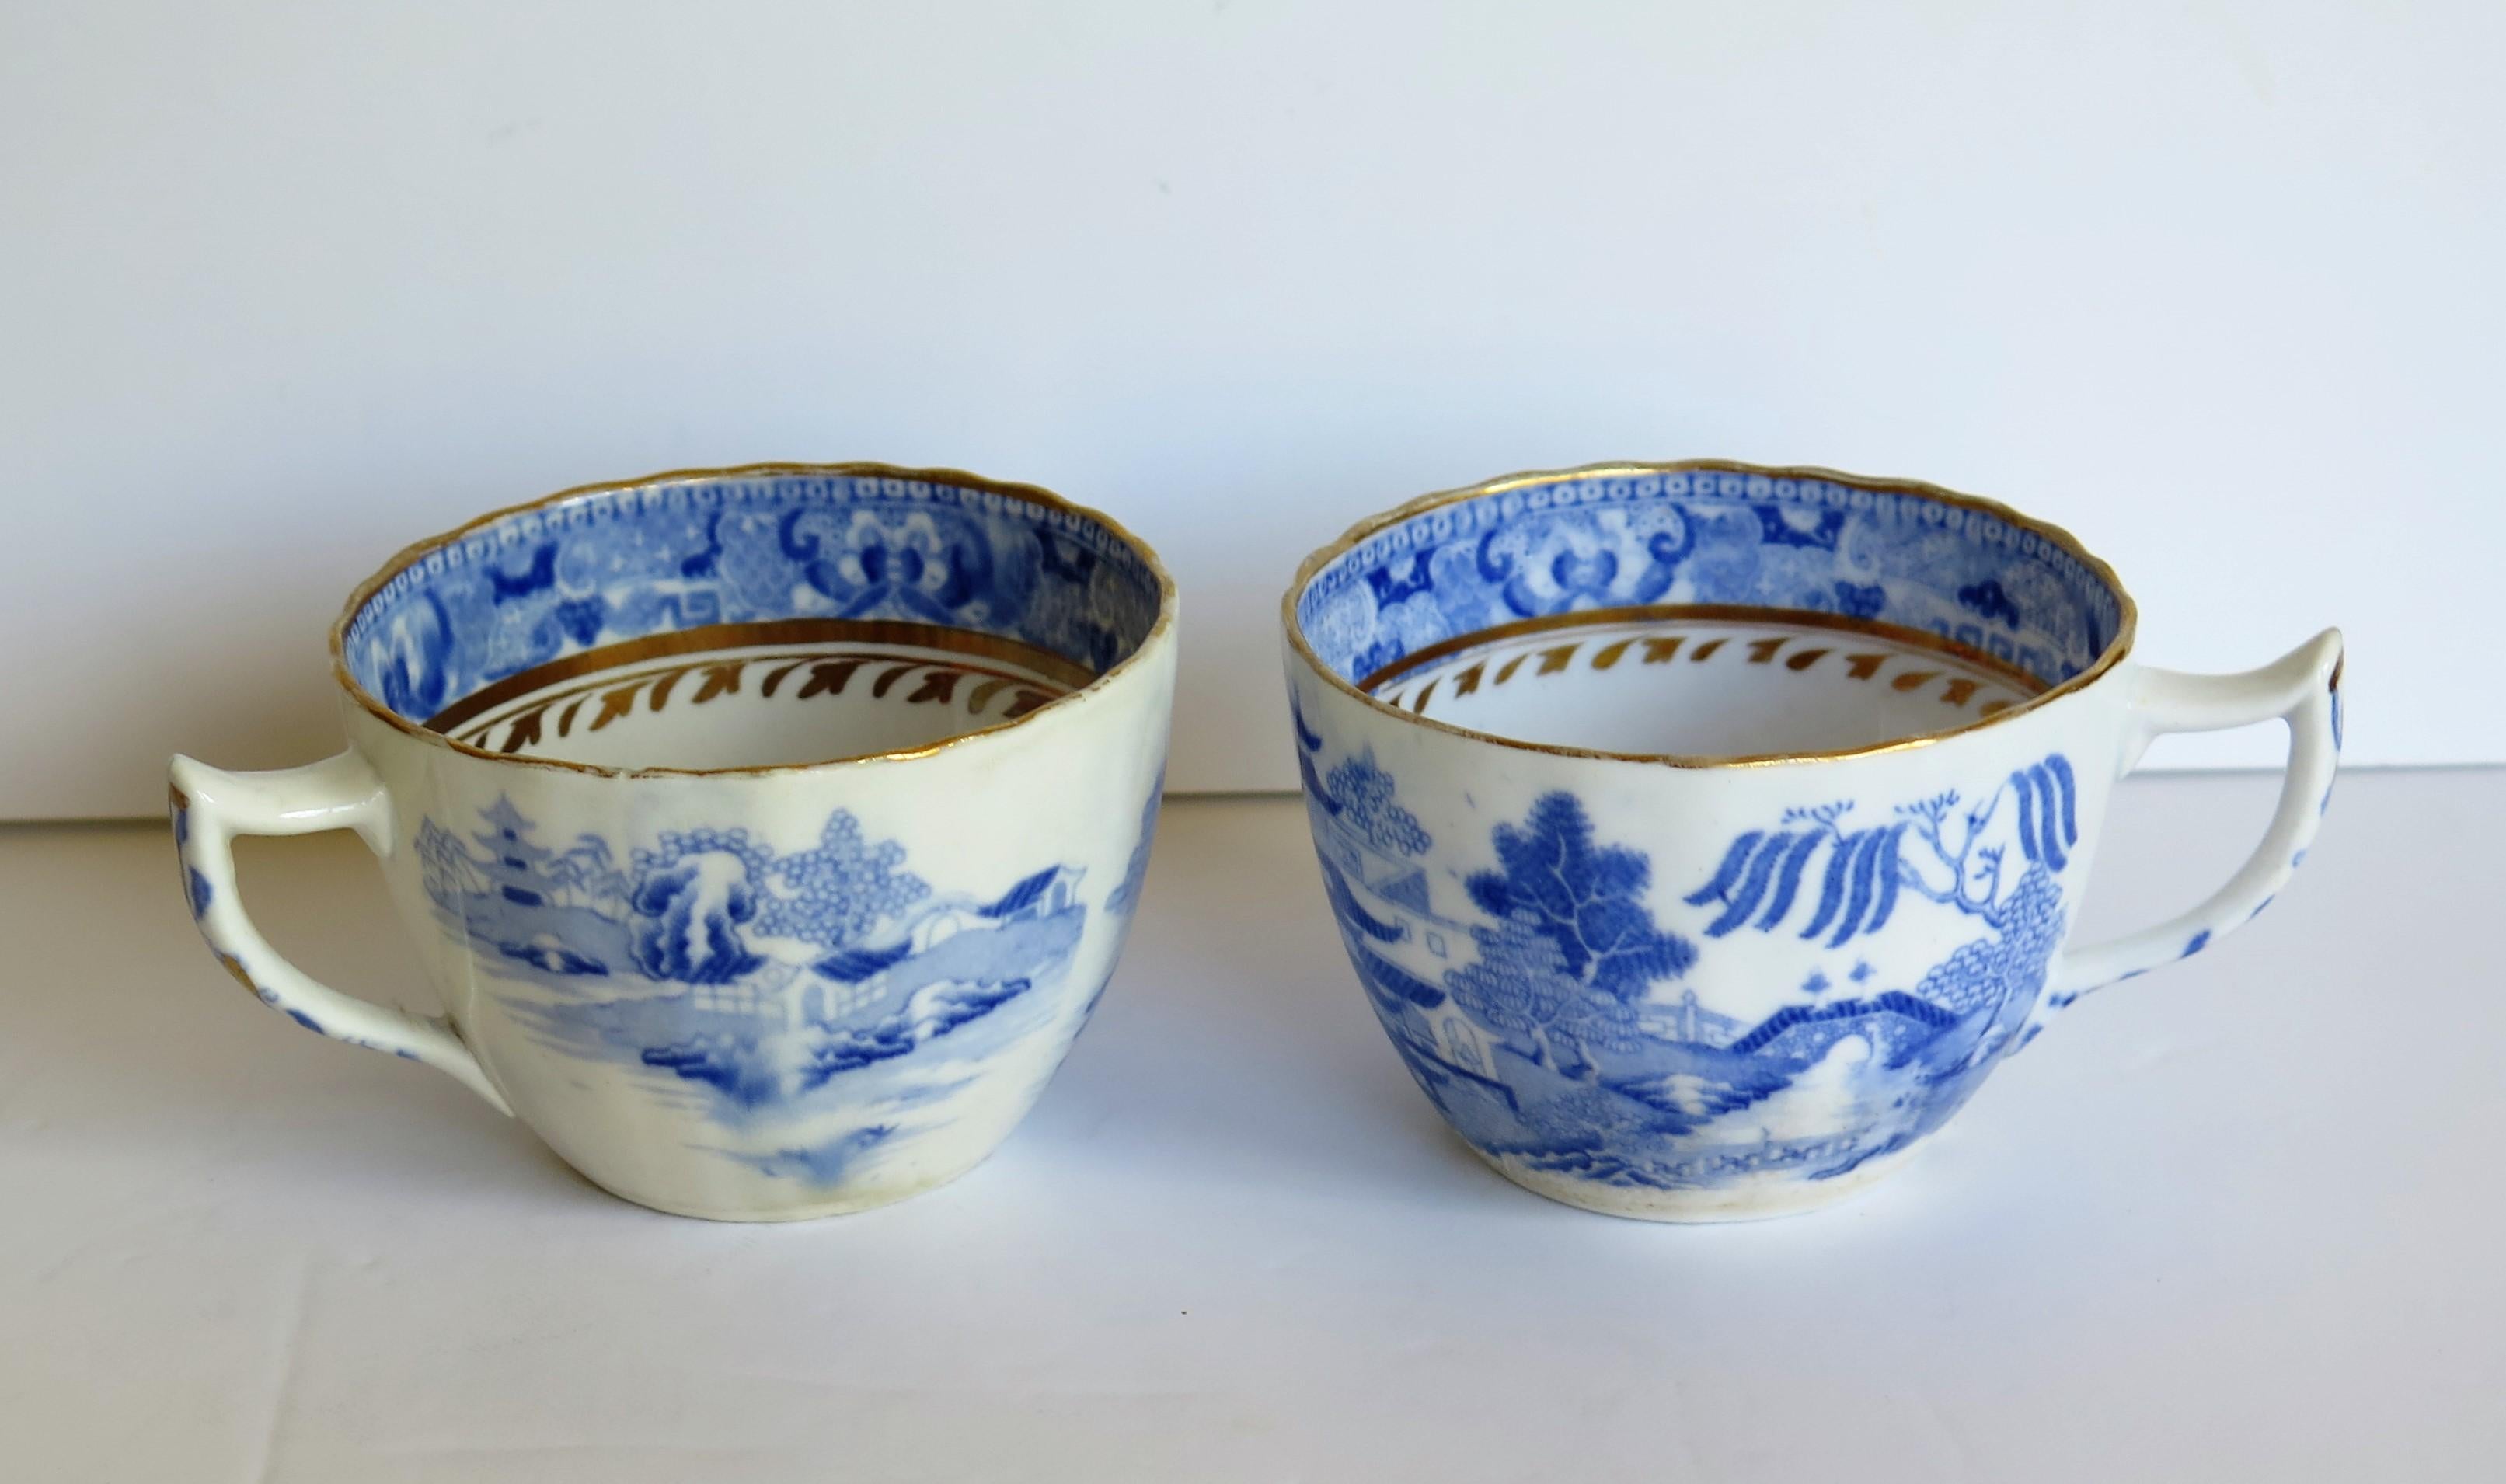 English Miles Mason Porcelain Pair of Tea Cups Broseley Blue and White Pattern, Ca 1805